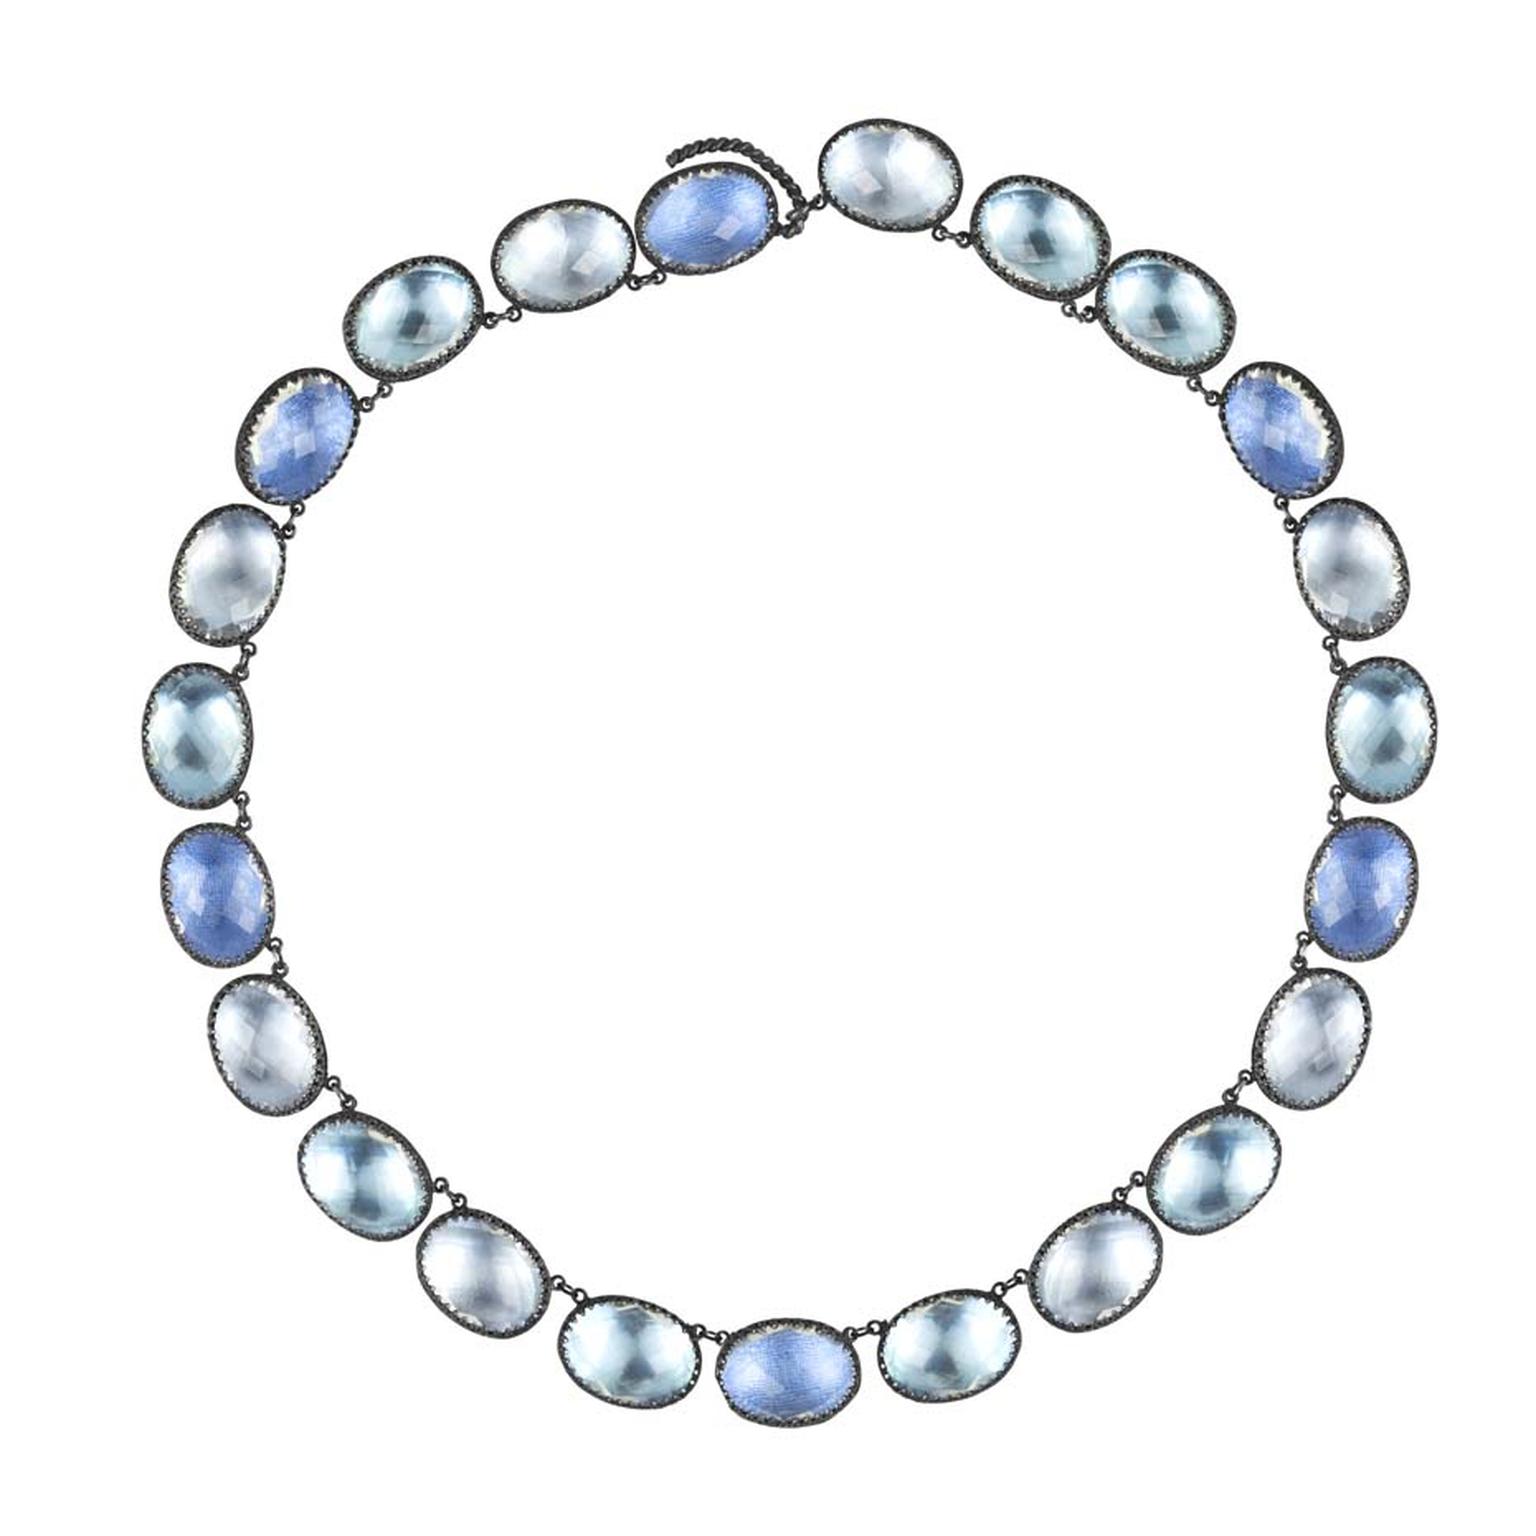 Larkspur & Hawk Lily Rivière-style white topaz necklace in oxidized silver with ice, azure and sky foils ($5,000).